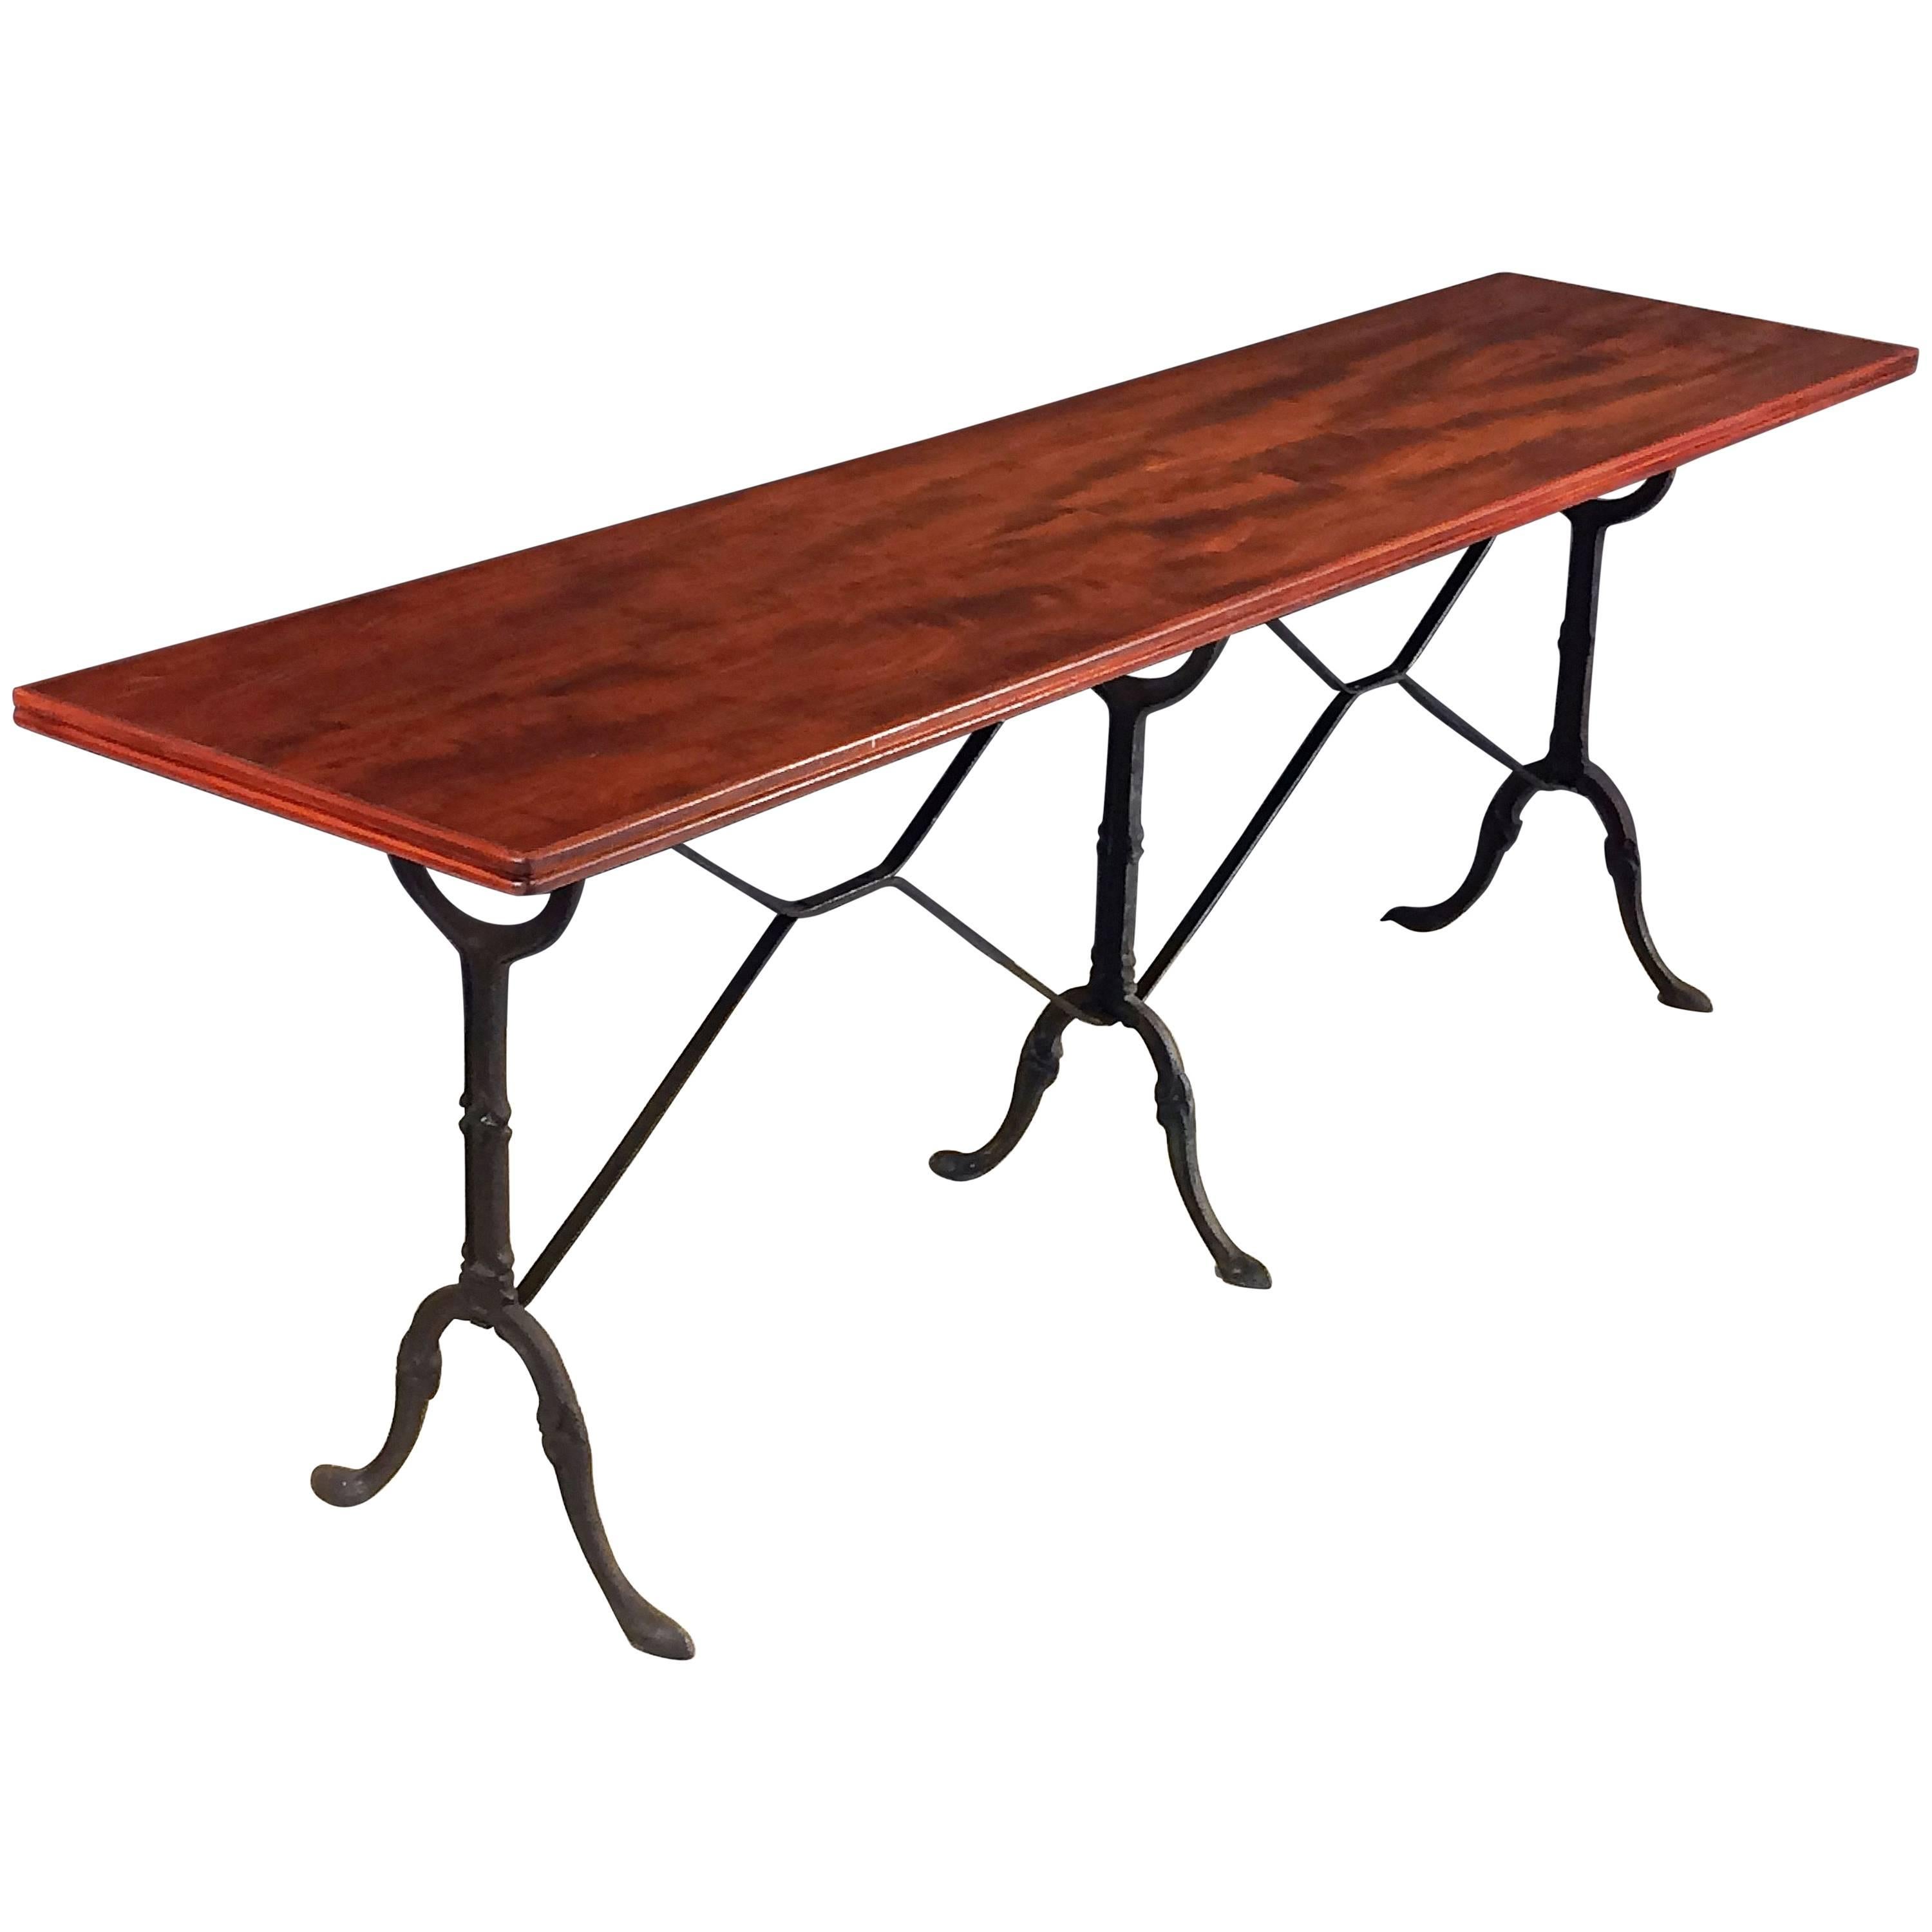 English Bistro or Console Table of Cast Iron with Wooden Top